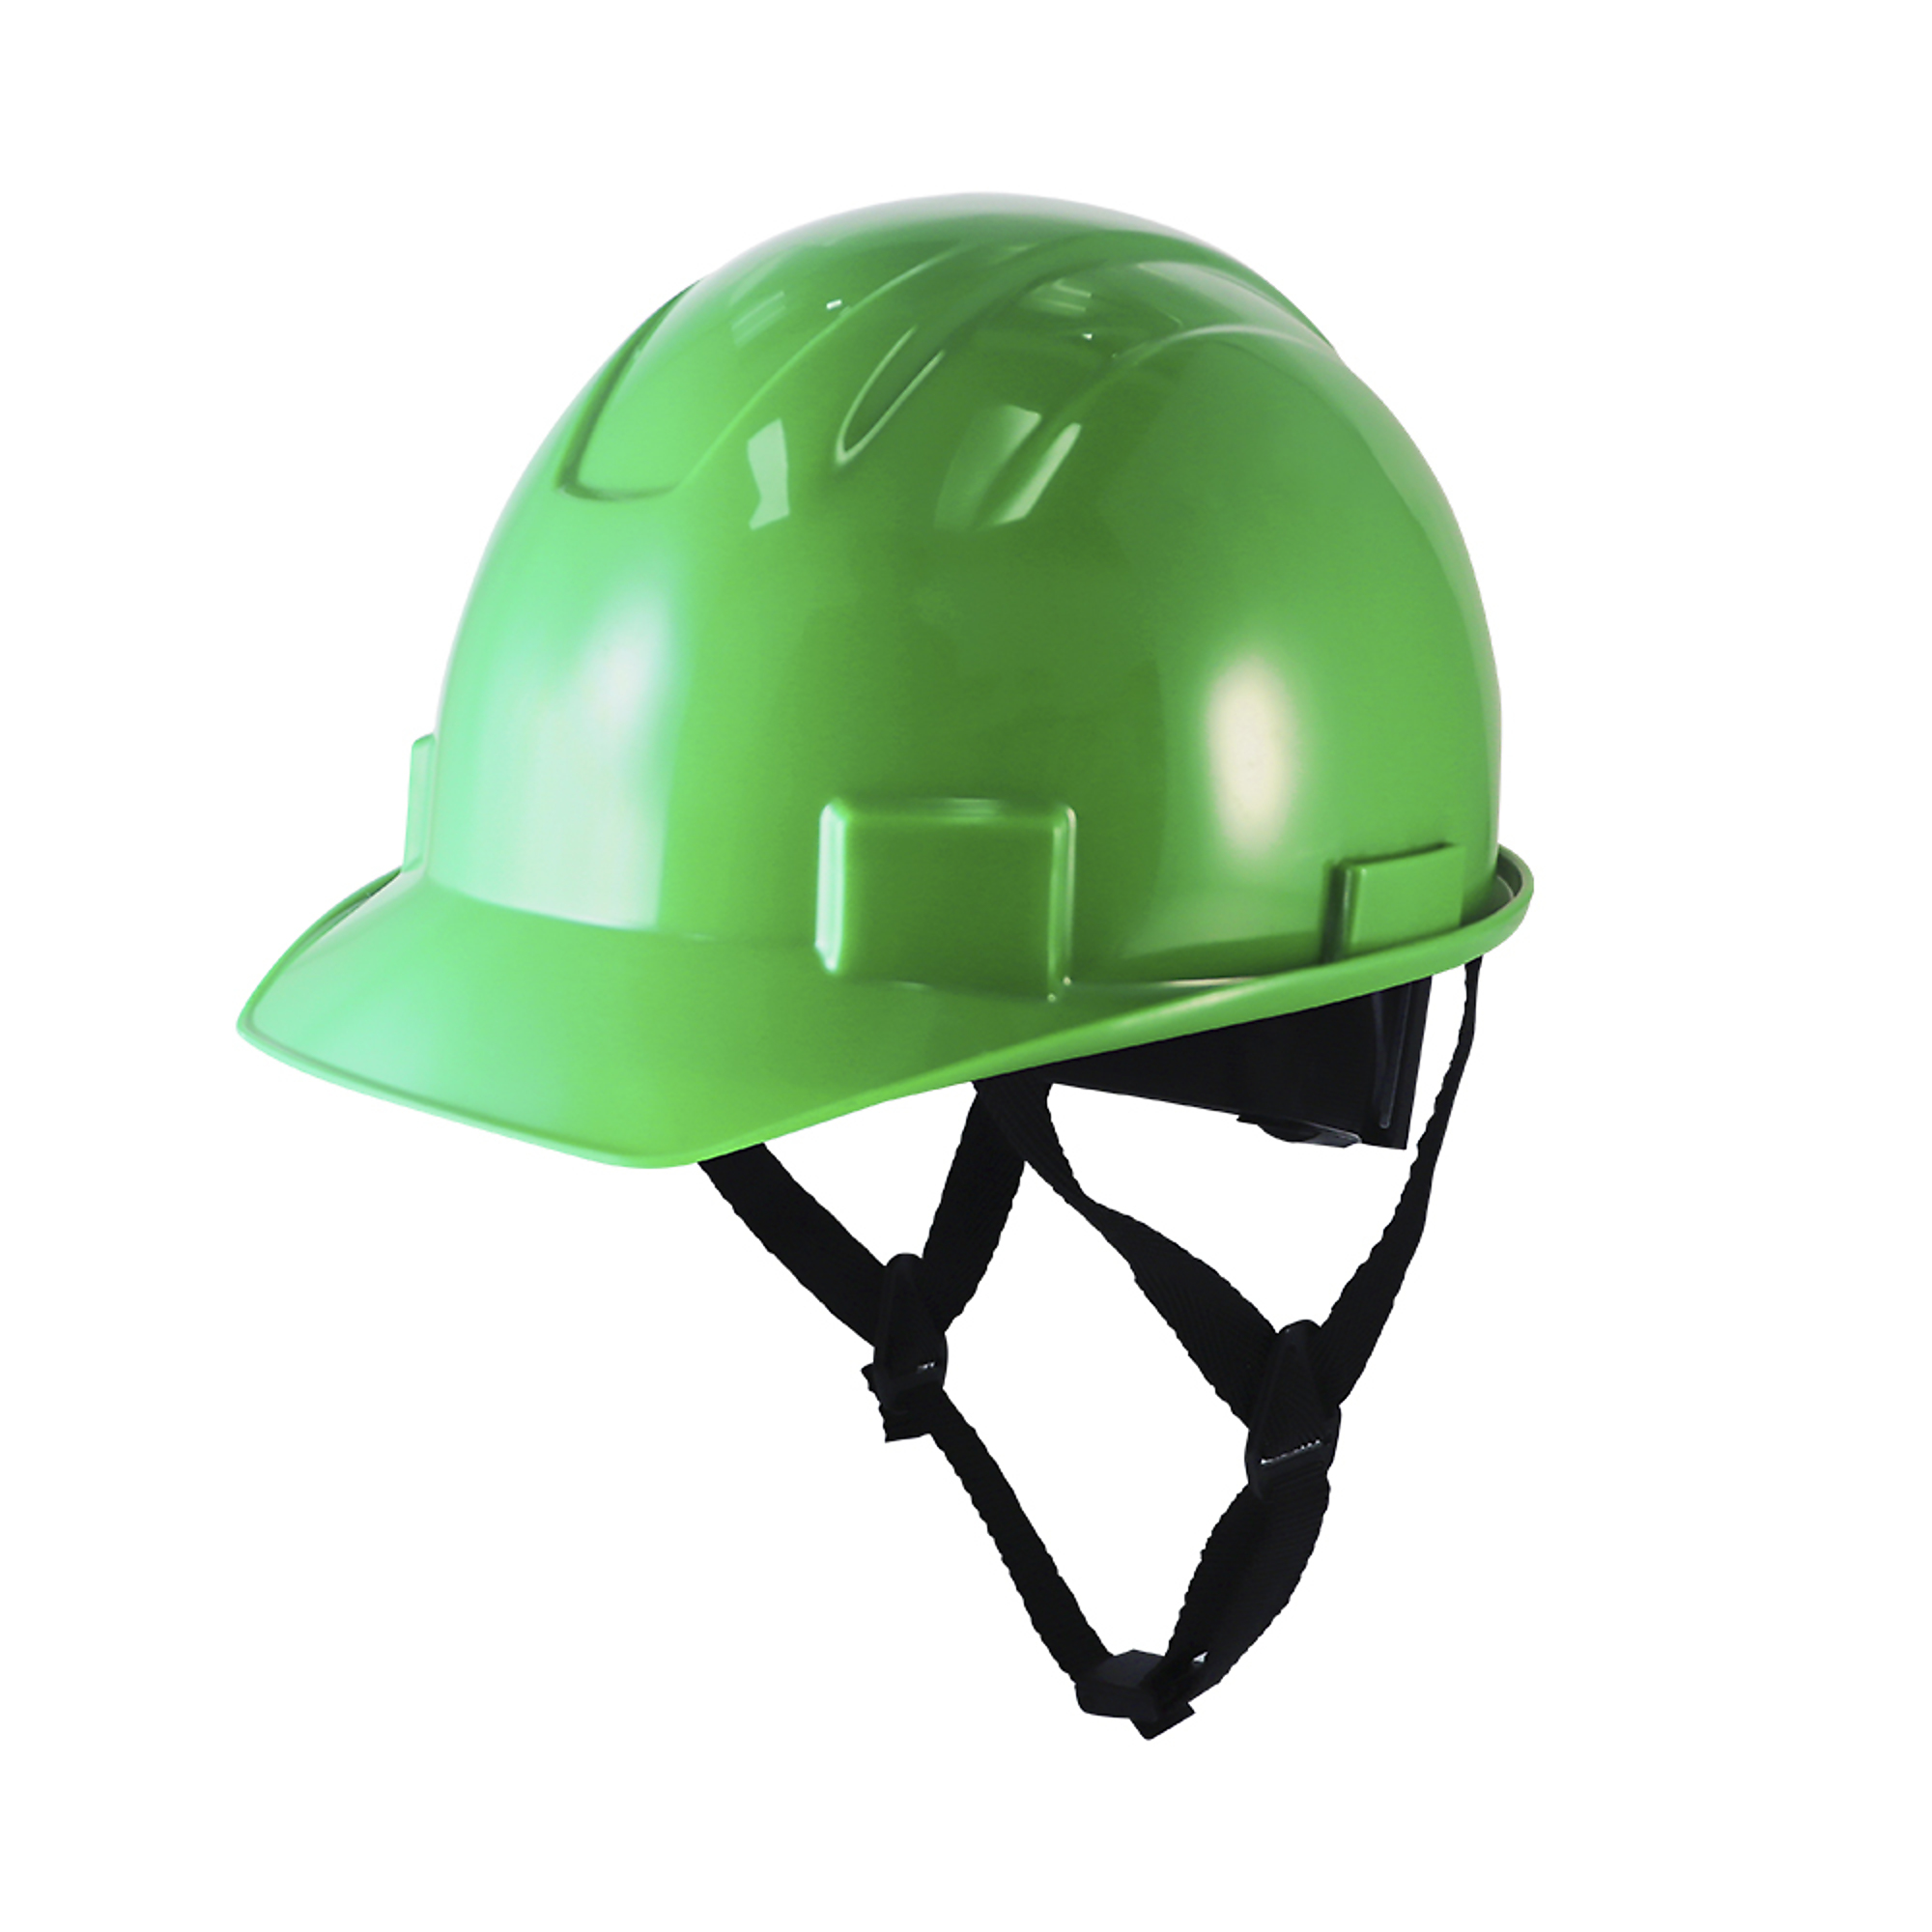 General Electric, Safety Helmet- Non-Vented- Green, Hard Hat Style Helmet, Hat Size One Size, Color Green, Model GH327N